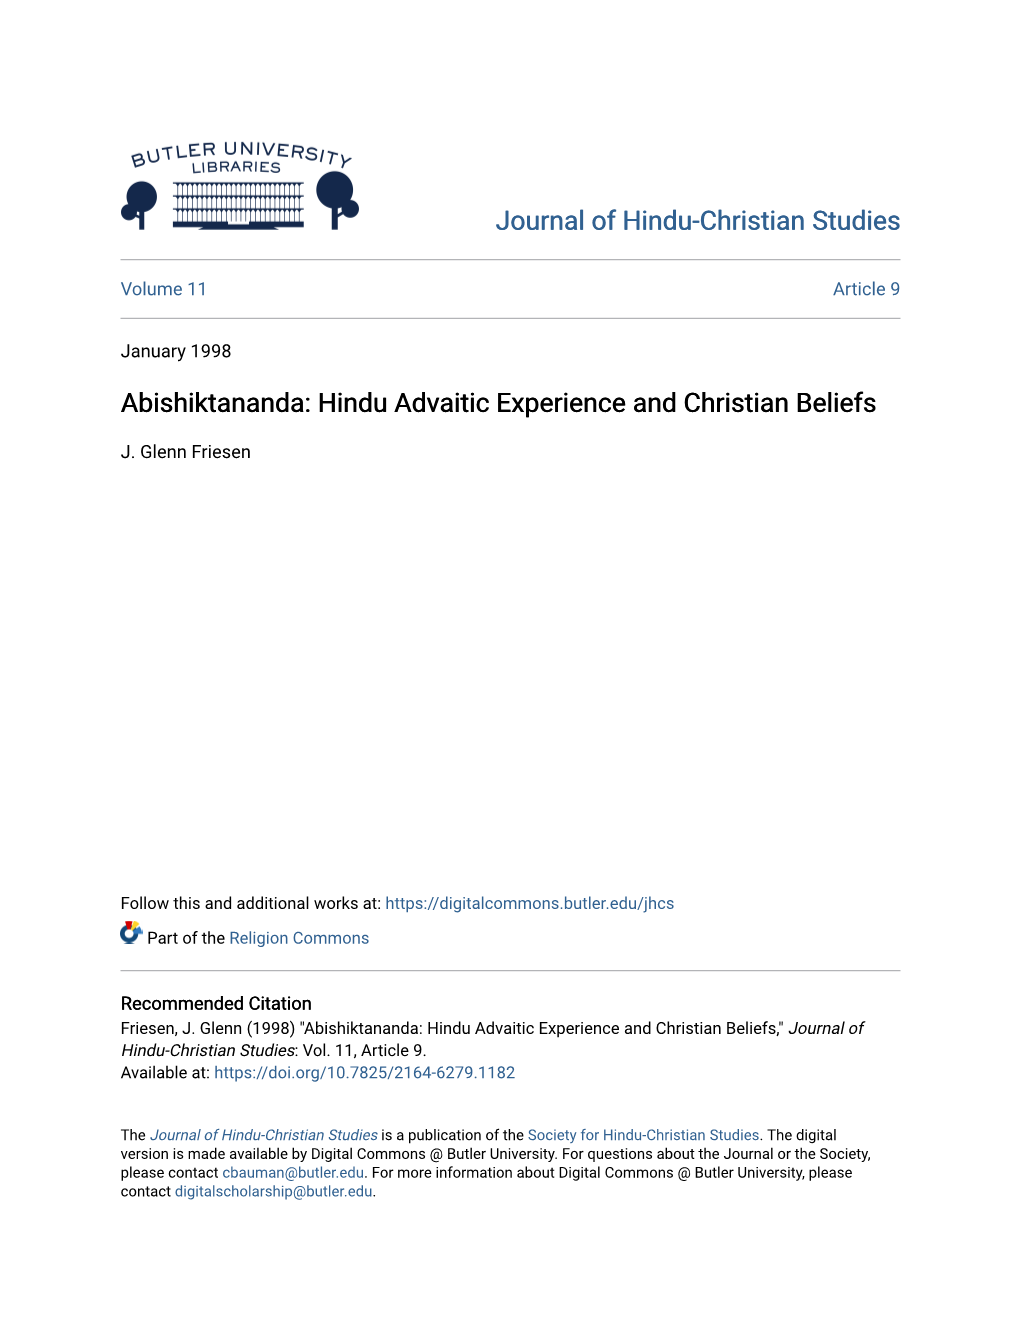 Hindu Advaitic Experience and Christian Beliefs